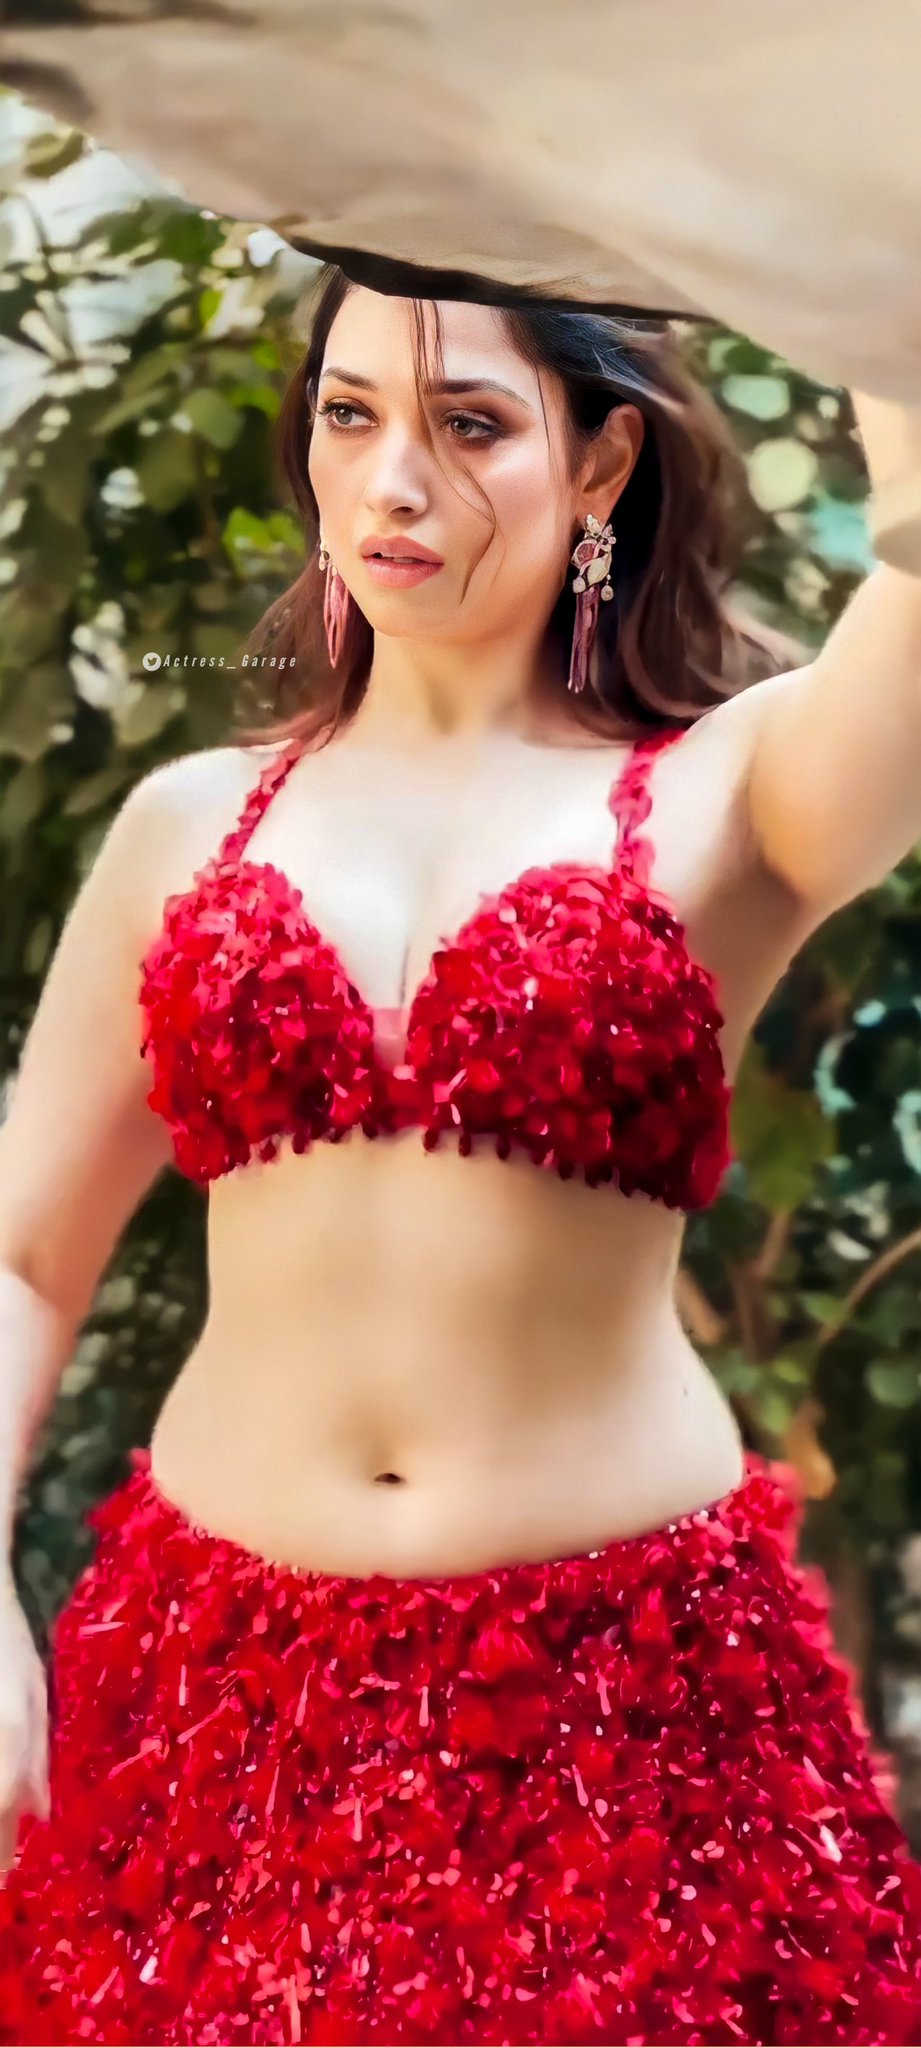 Pic Talk: Milky White Tamannaah’s Red-hot Look